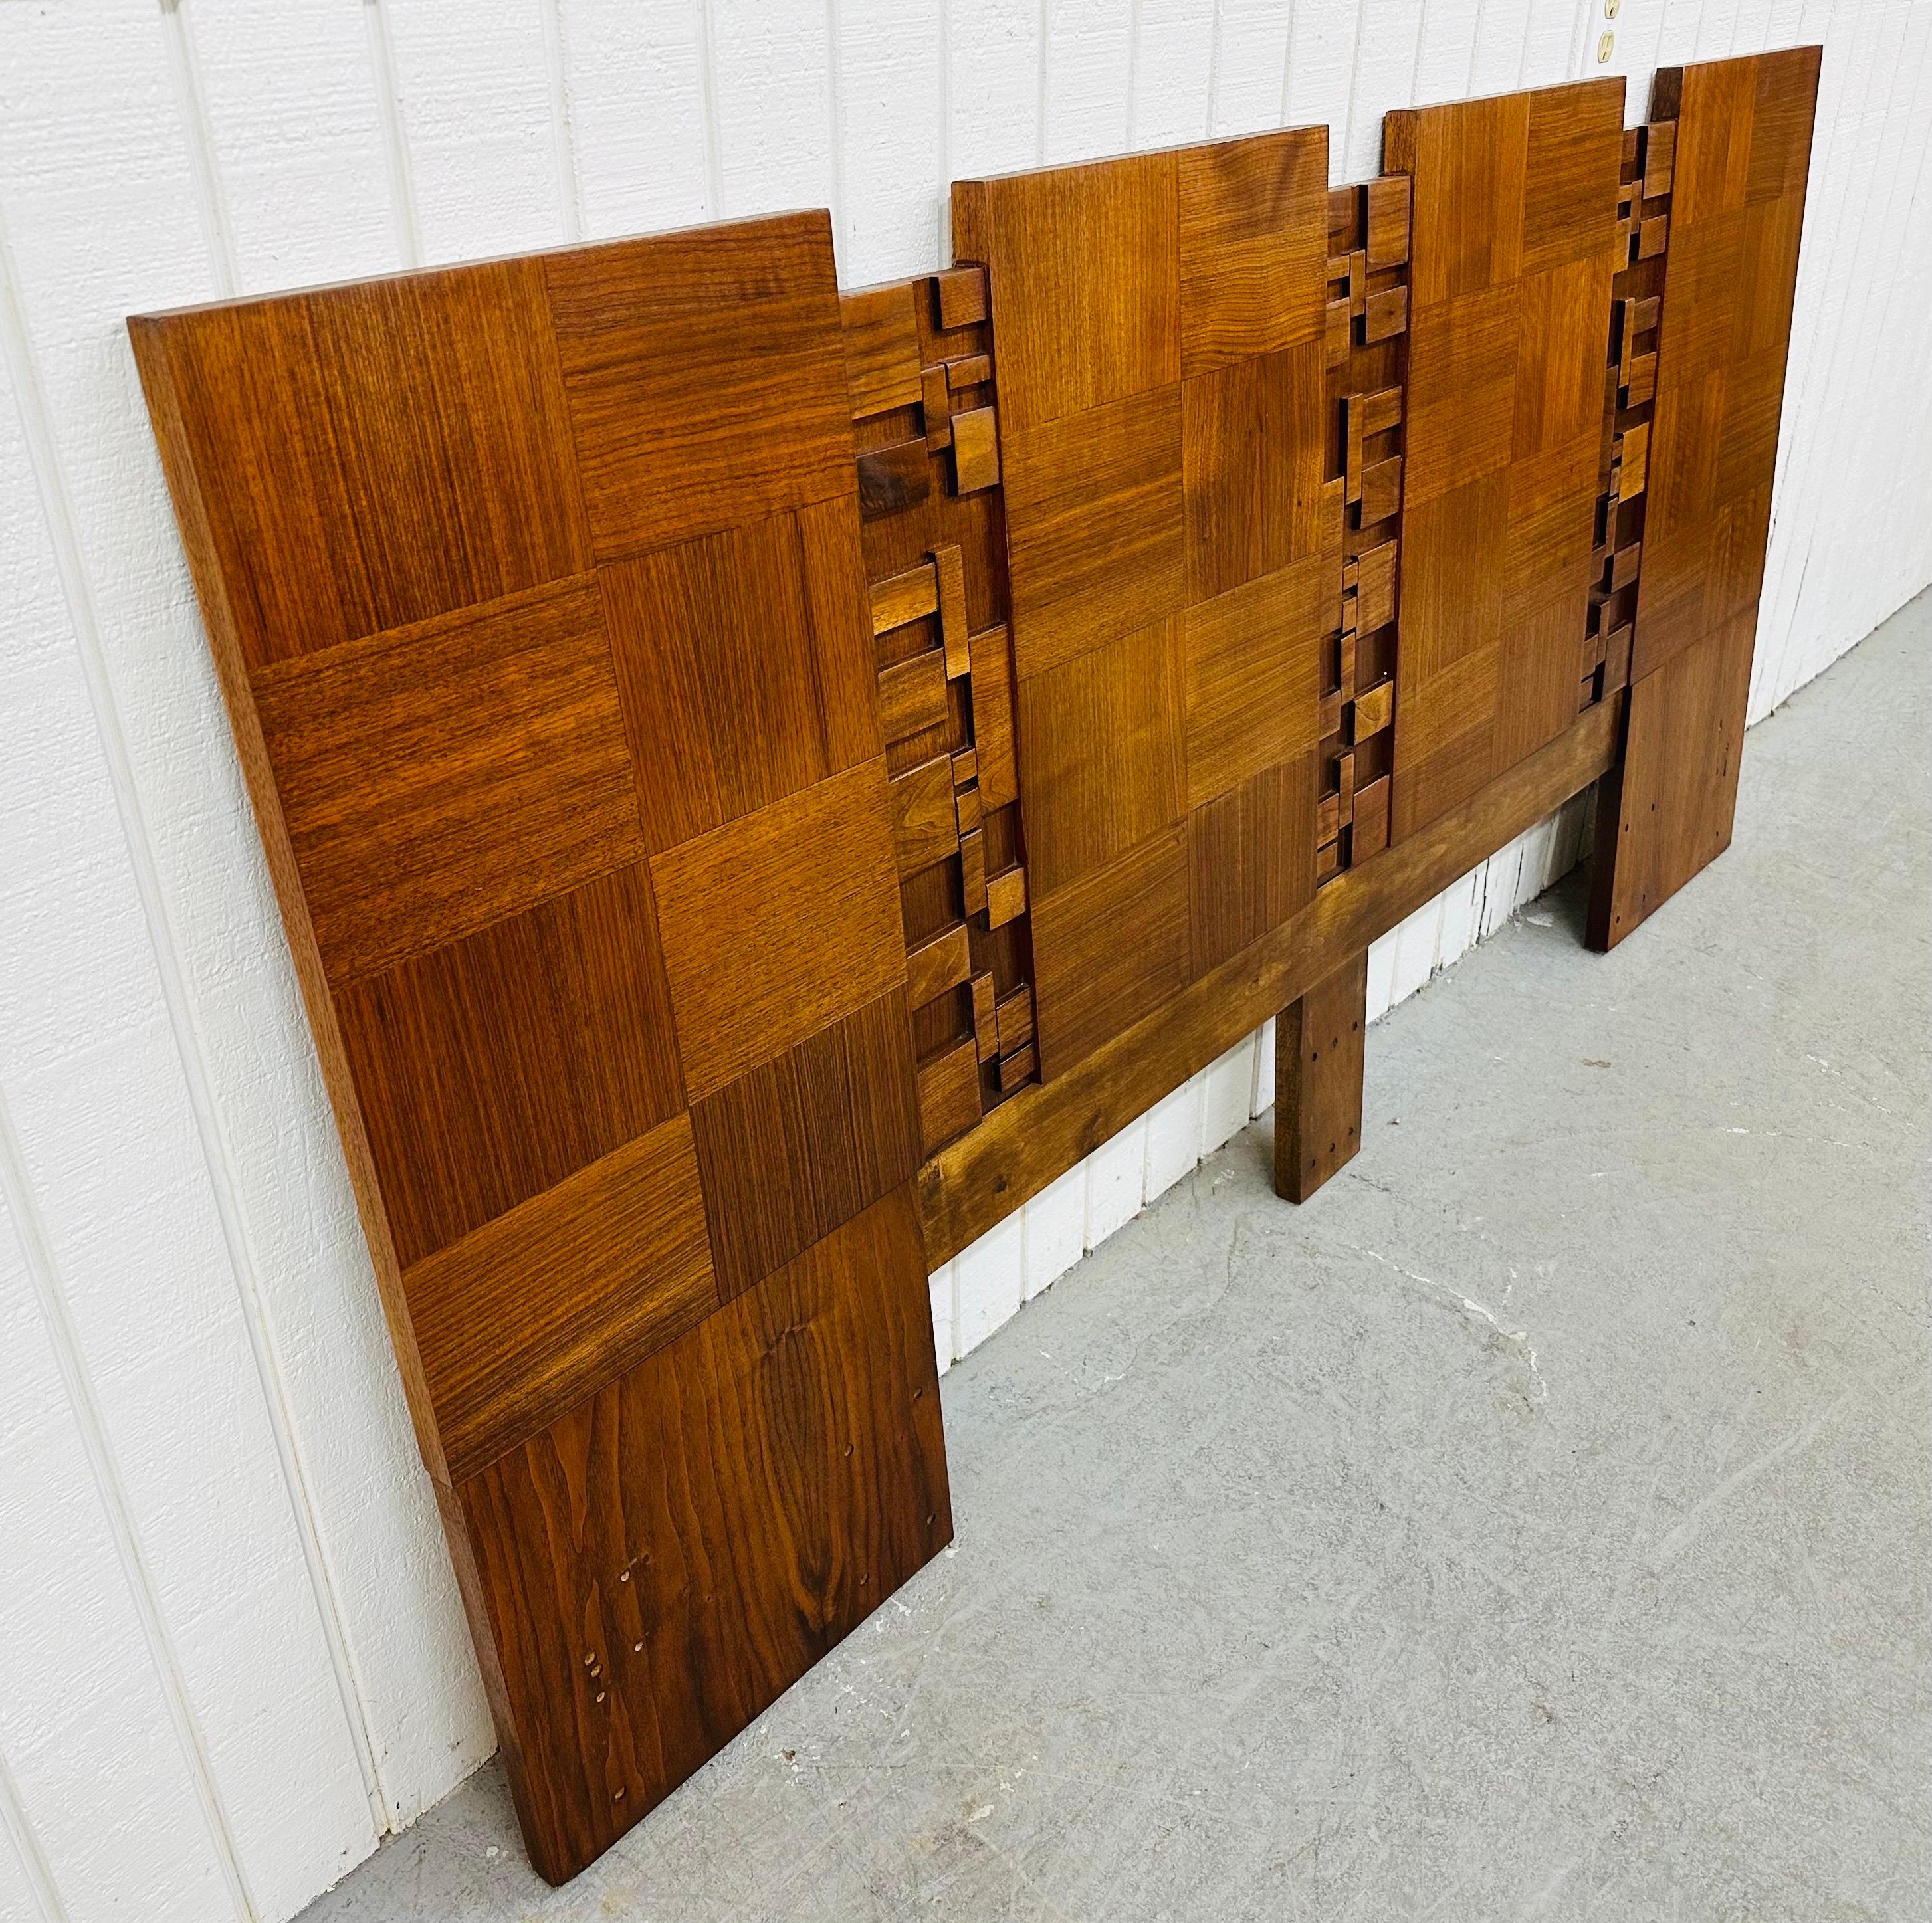 This listing is for a Mid-Century Modern Brutalist Walnut King Headboard. Featuring a straight line design, brutalist block front, and a beautiful walnut finish. This is an exceptional combination of quality and design in the style of Paul Evans!